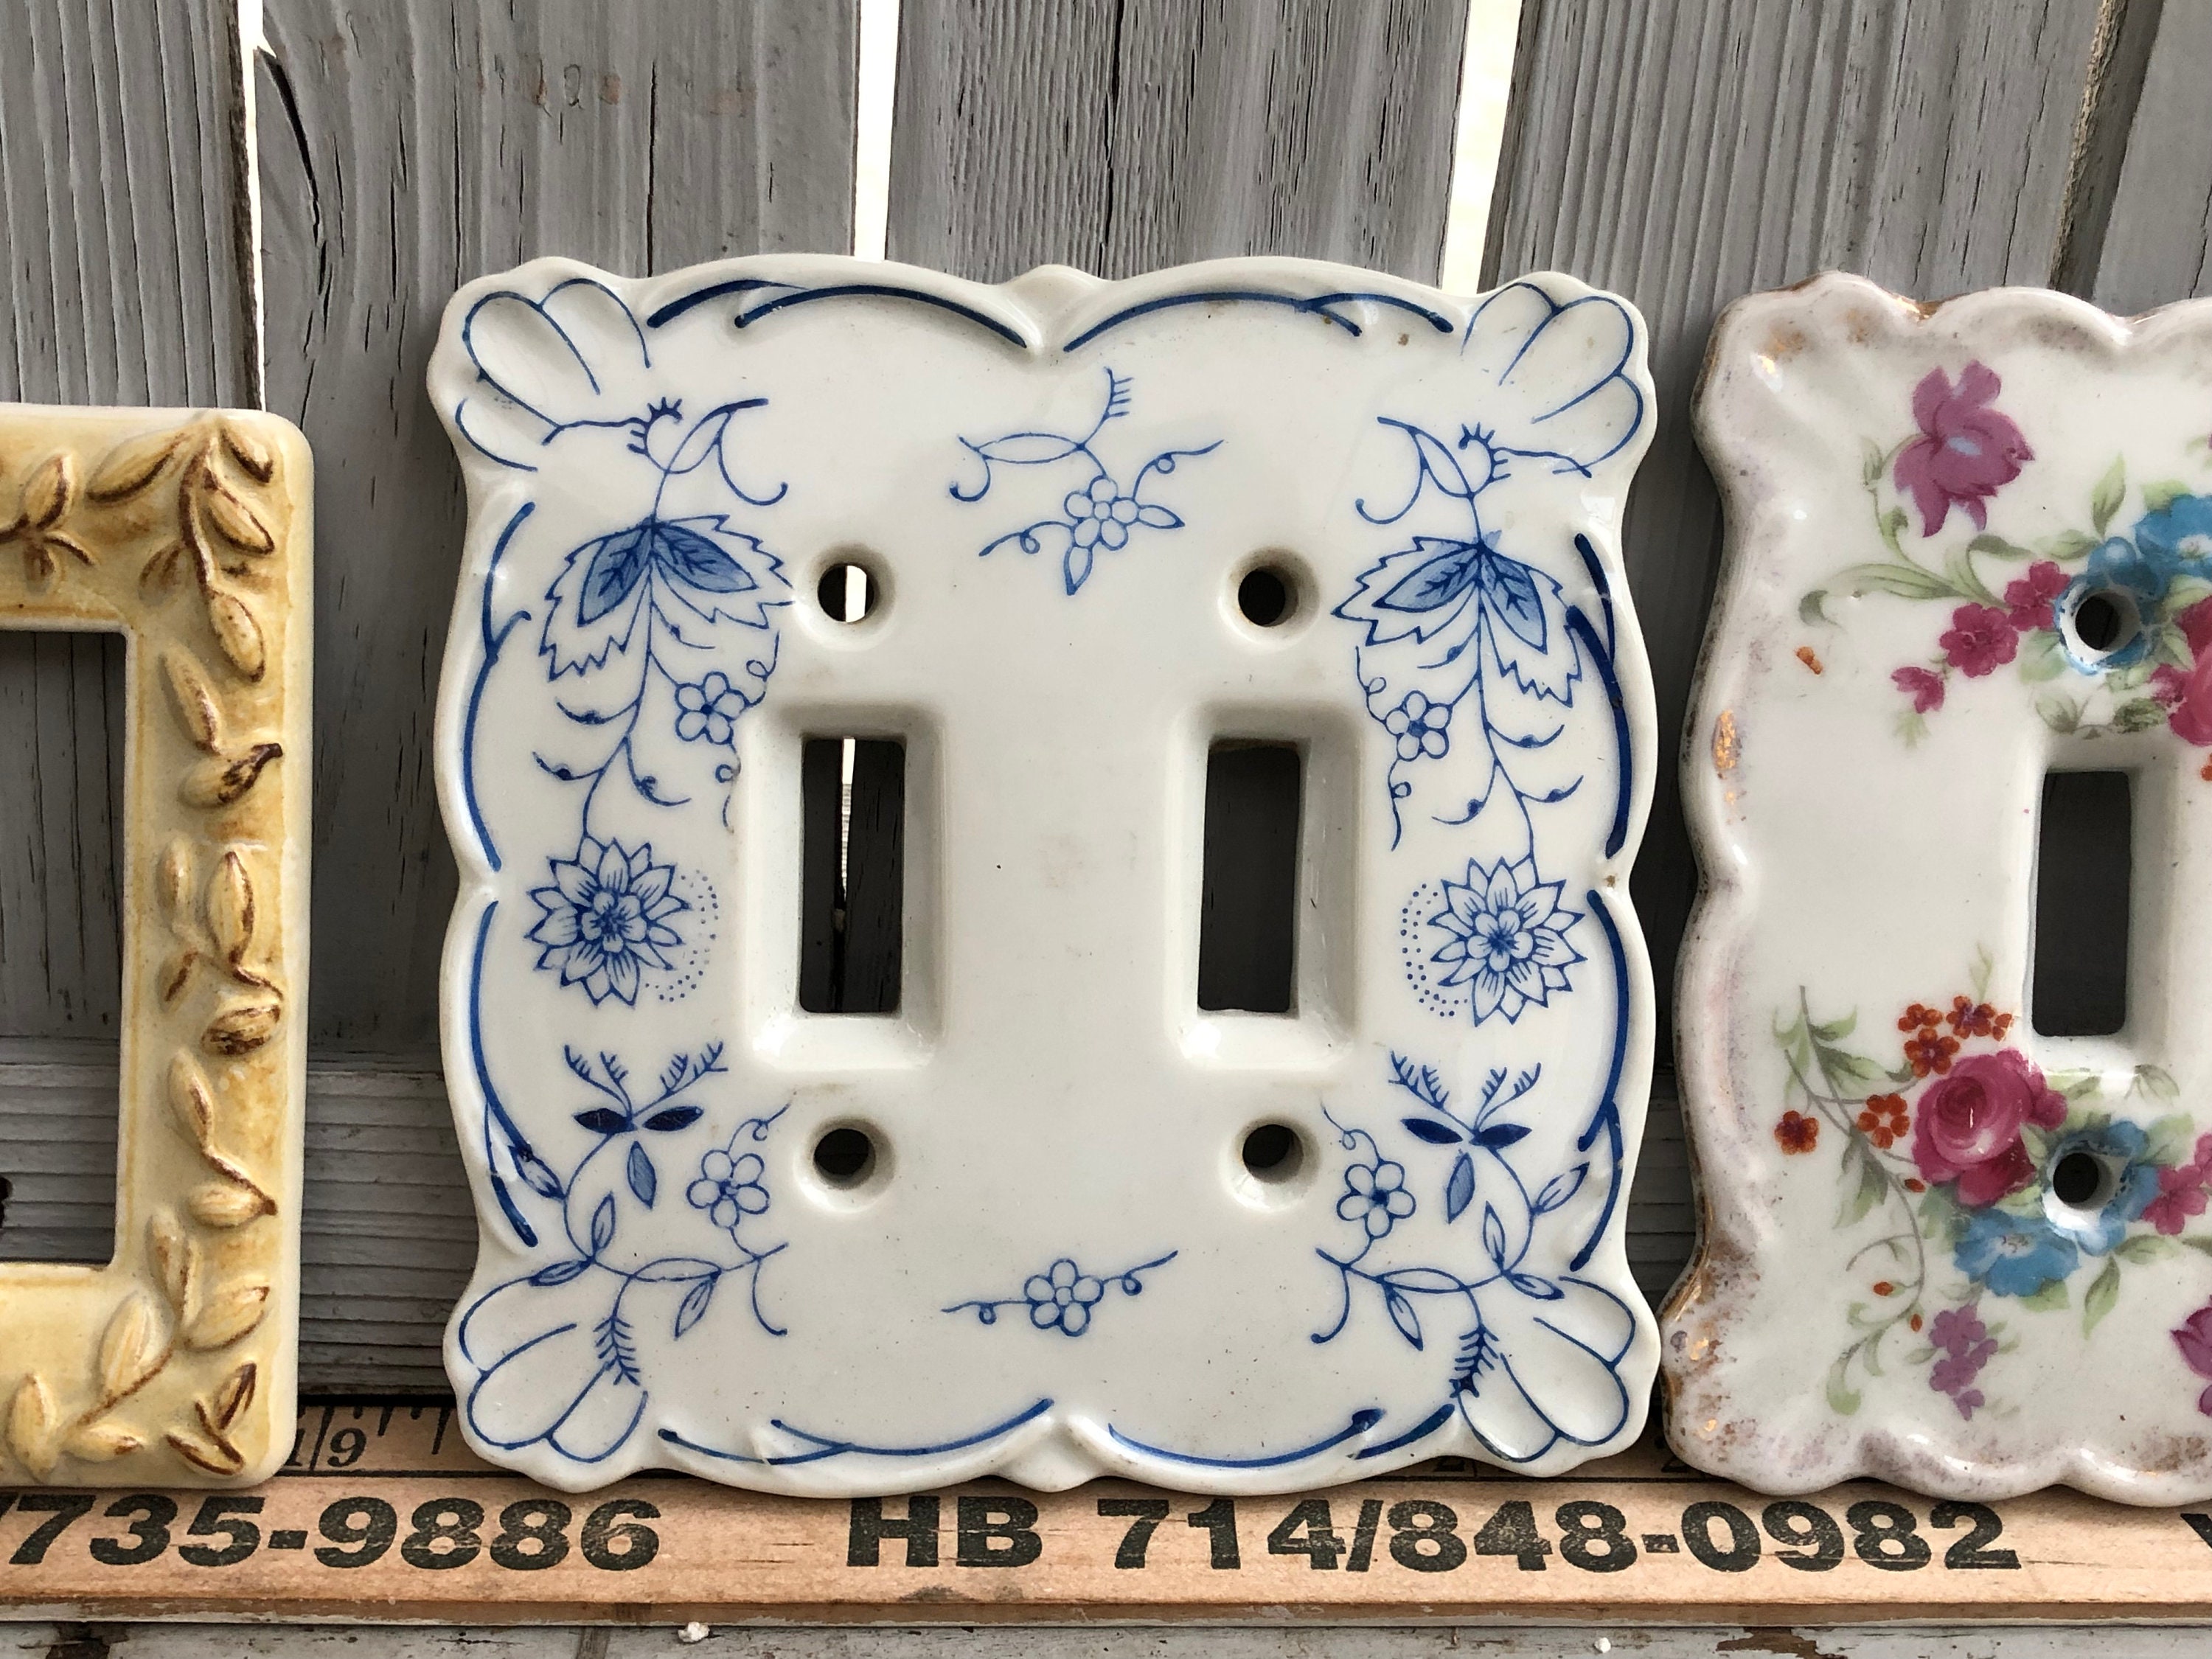 Electrical Outlet Plate, Various Choices of Ceramic Glass or Metal